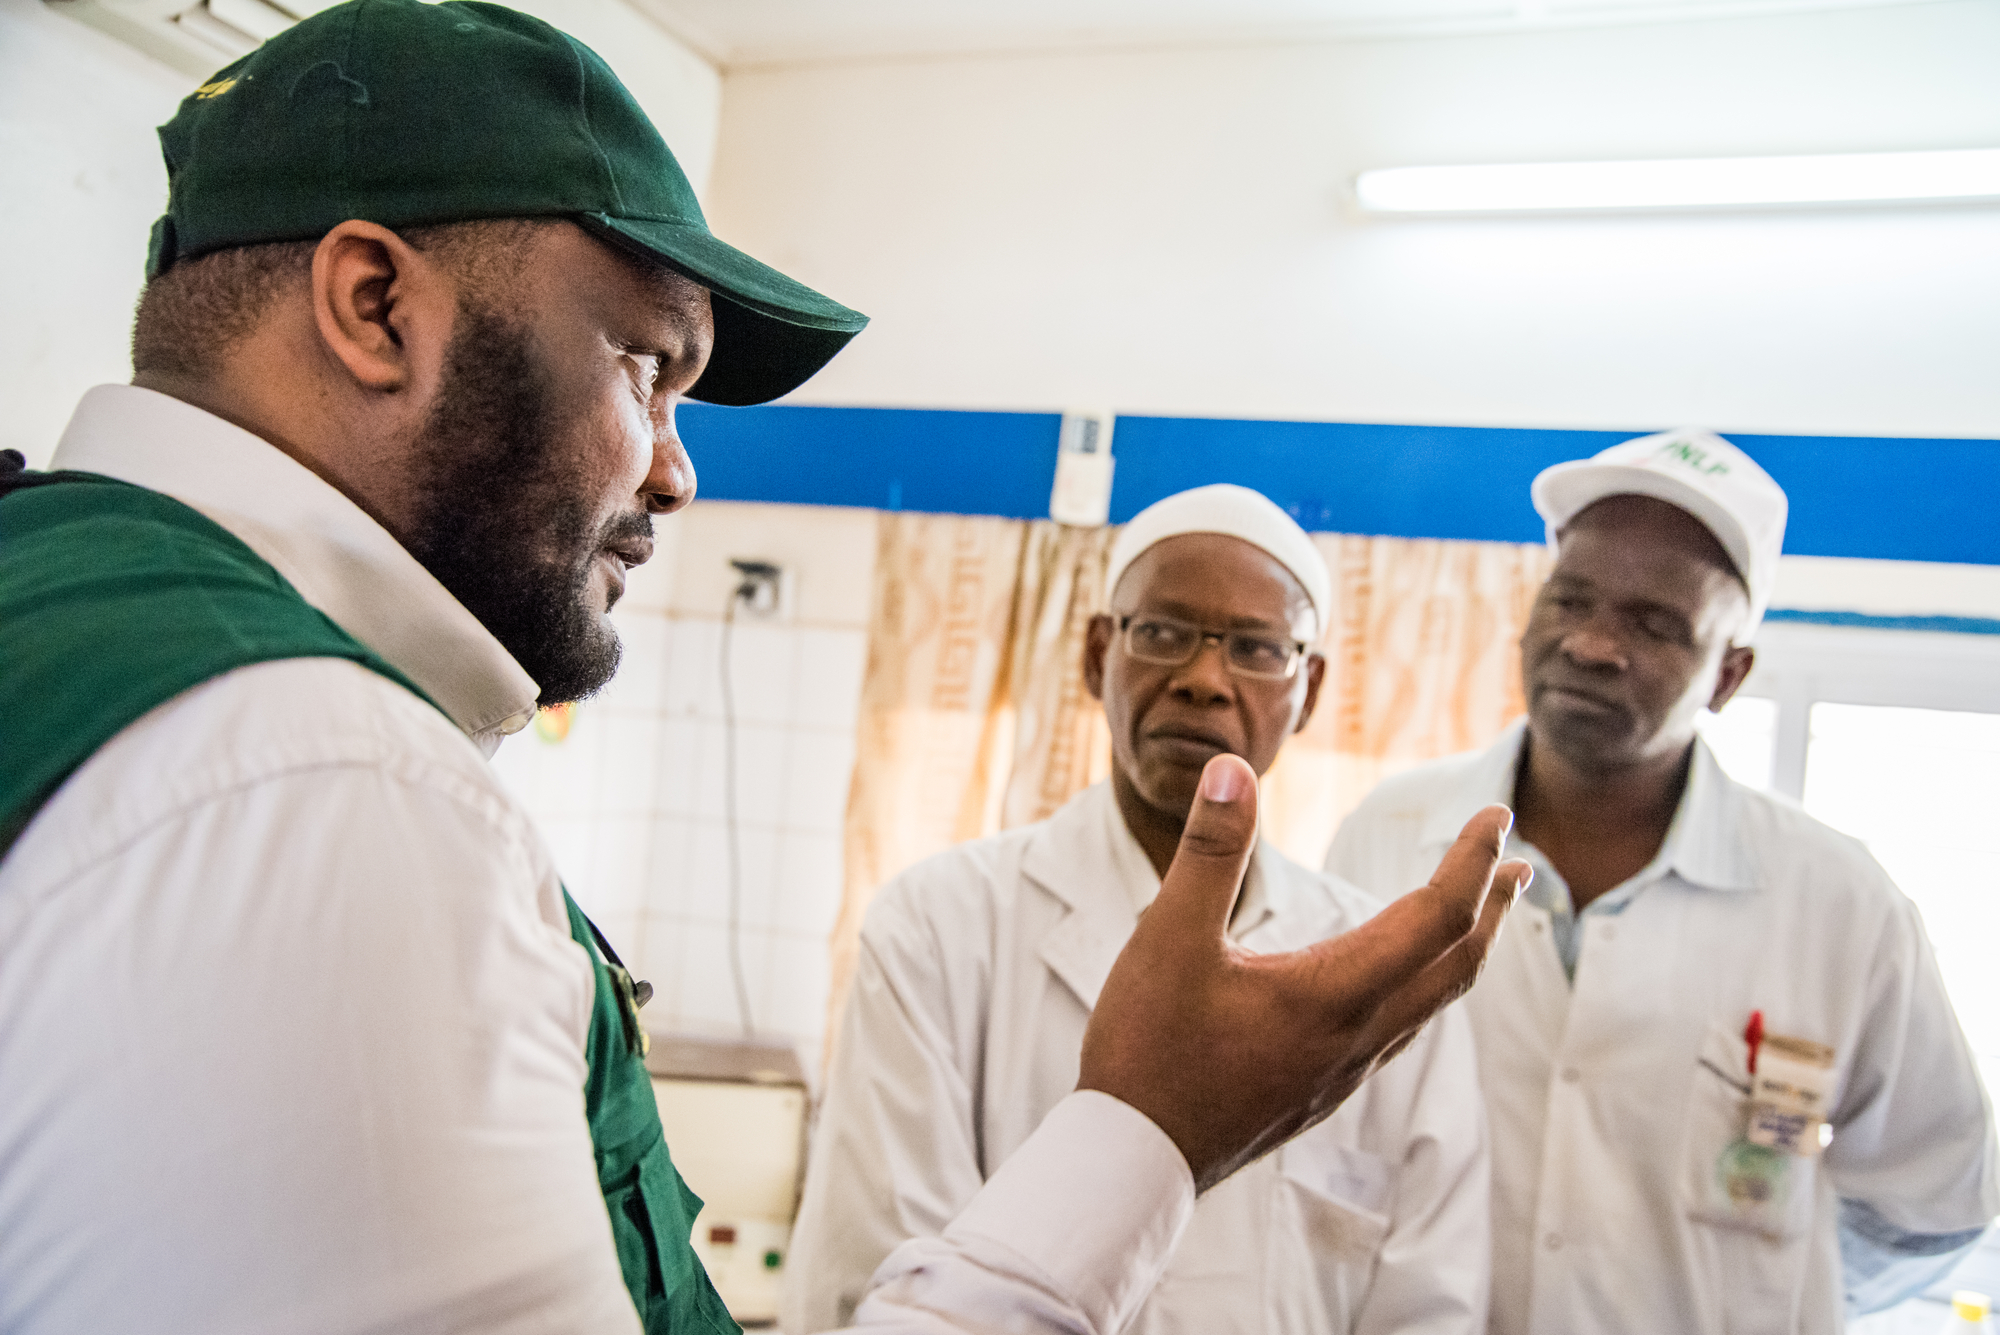 Abdullah Al Ruwaili, Director of Humanitarian Aids Management at the King Salman Humanitarian Aid and Relief Center talks with health workers in the laboratory where malaria is identified under microscope at the Deggo Health Centre in Pekine, Dakar, Senegal on March 13, 2017. The impact committee of the Lives and Livelihoods Fund (LLF) visited the center to learn more about the fight against malaria. 